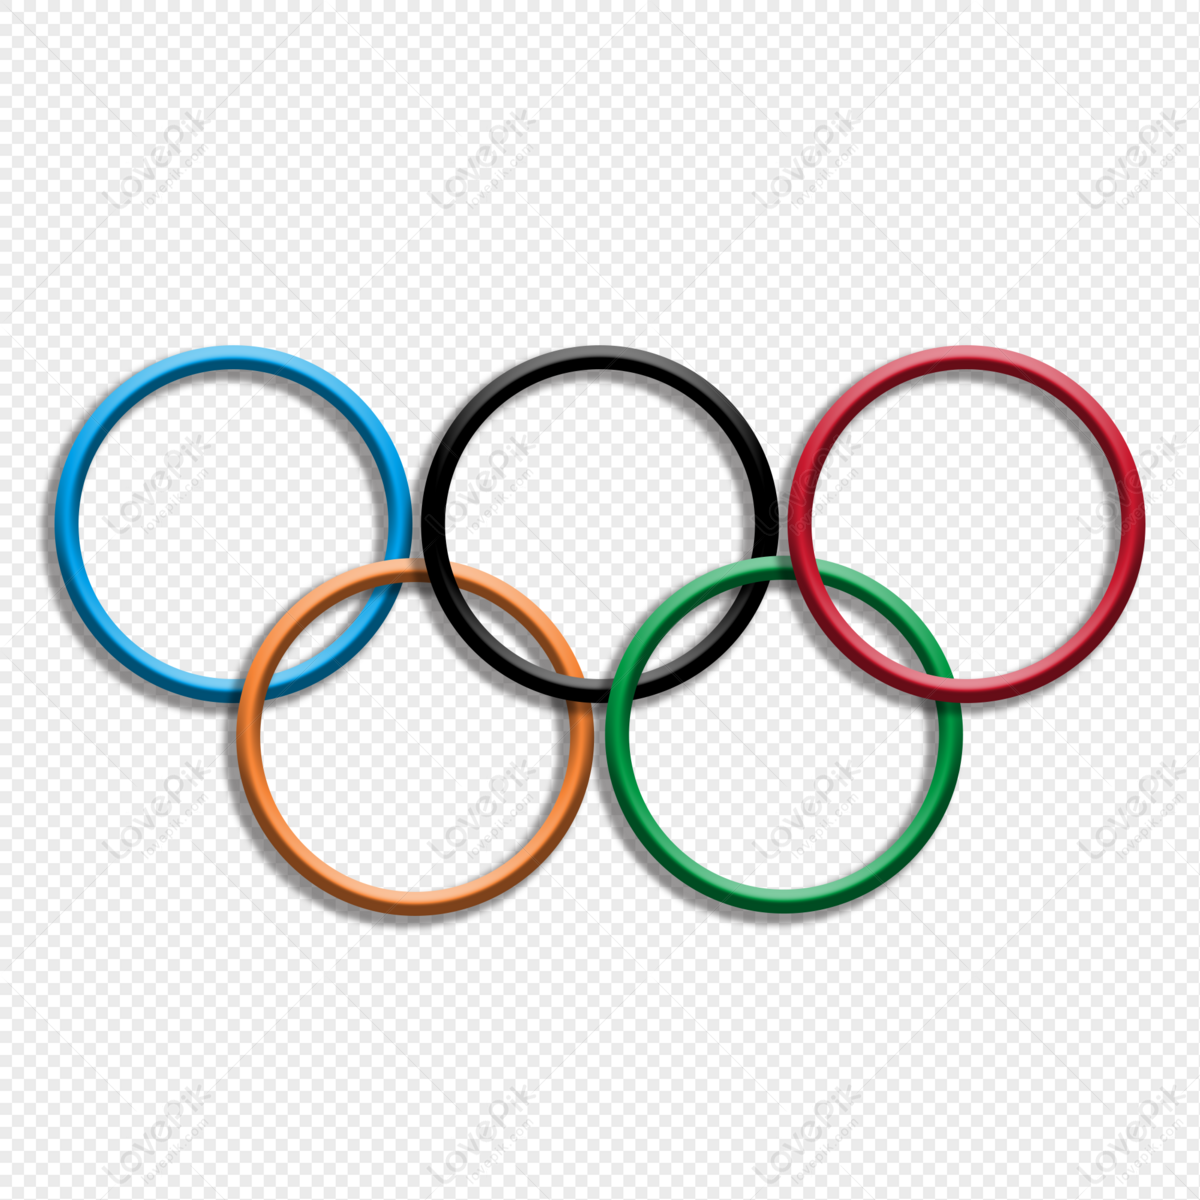 Olympic Rings High Quality Png - Transparent Background Olympic Rings Png  Transparent PNG - 532x405 - Free Download on NicePNG